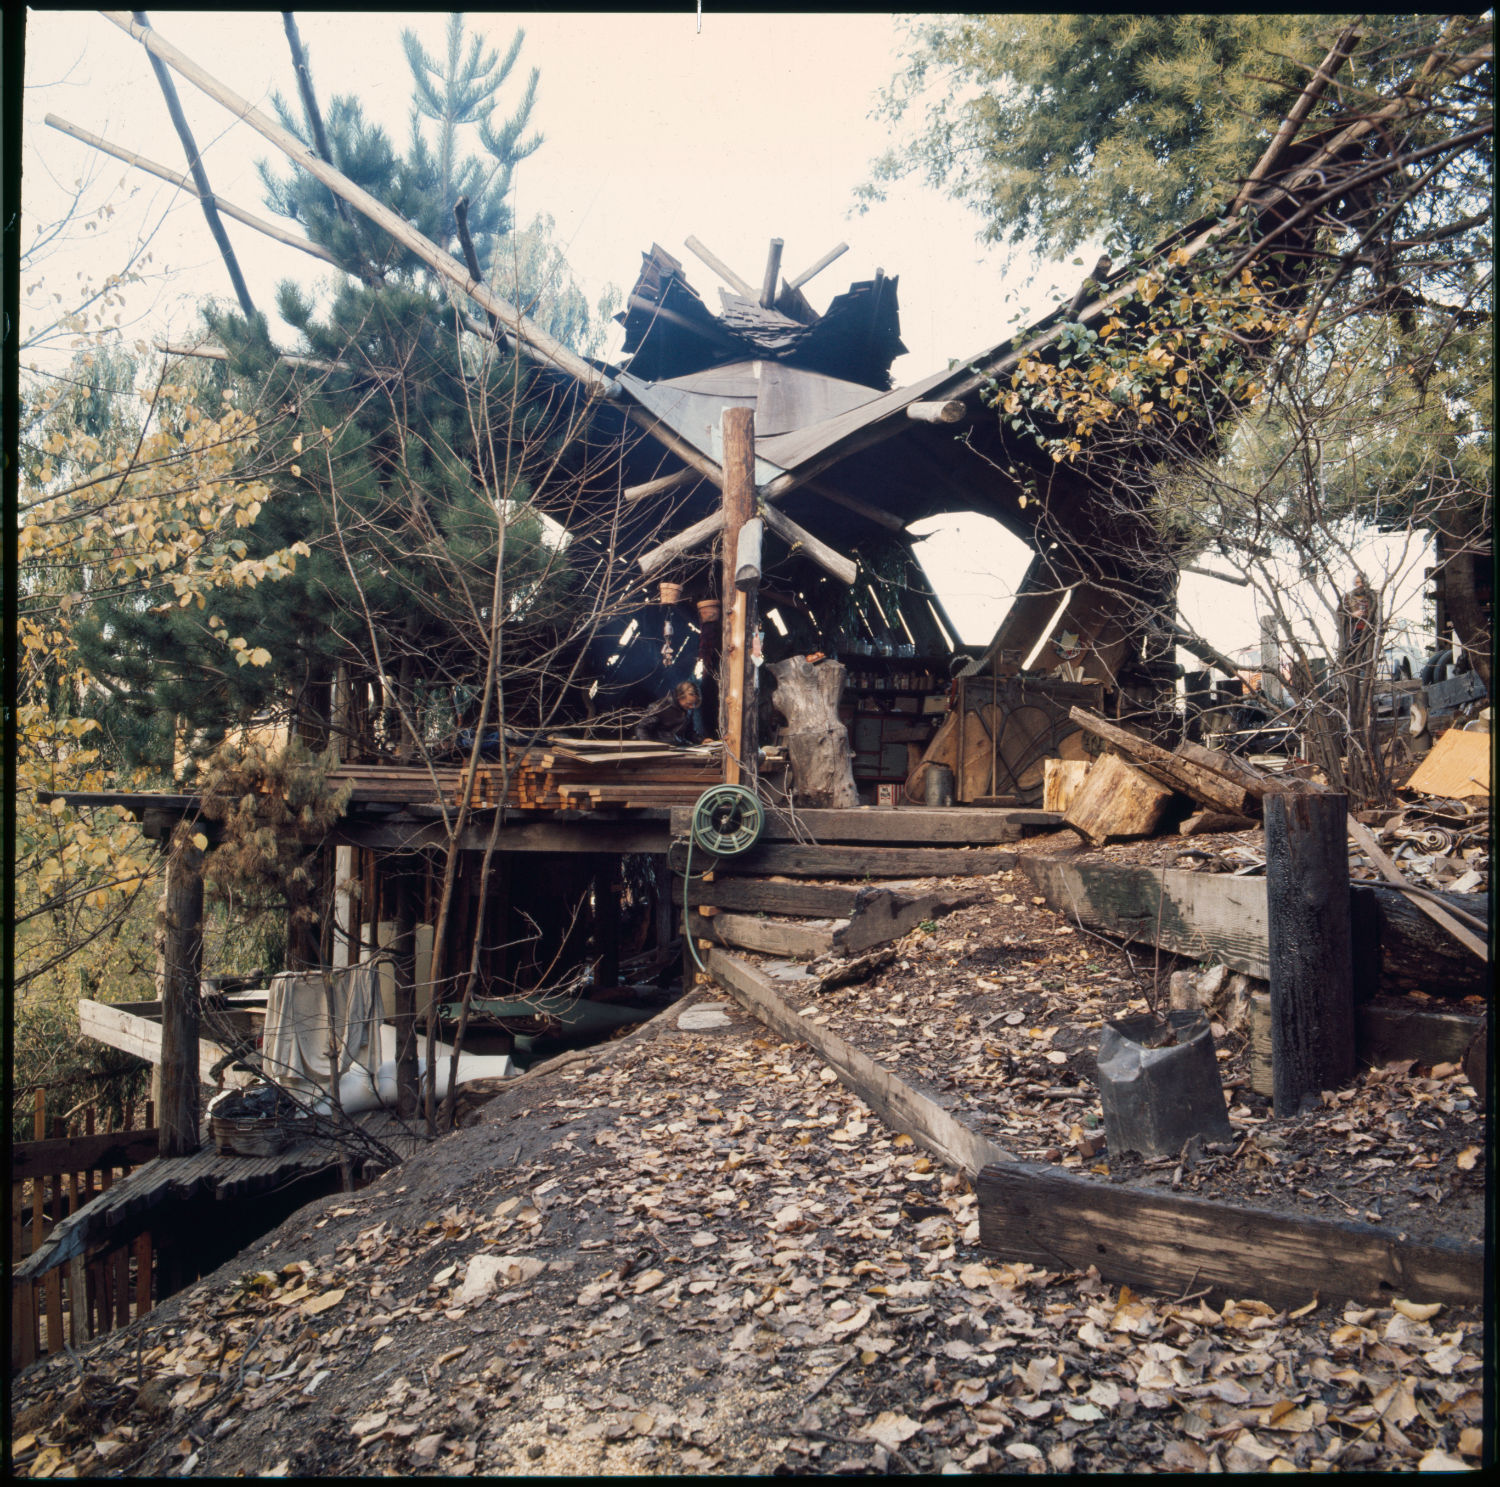 Barry Shapiro: Handmade Houses, early-1970s; digital images from slides; Barry Shapiro photograph archive, BANC PIC 2016.003, The Bancroft Library, University of California, Berkeley.